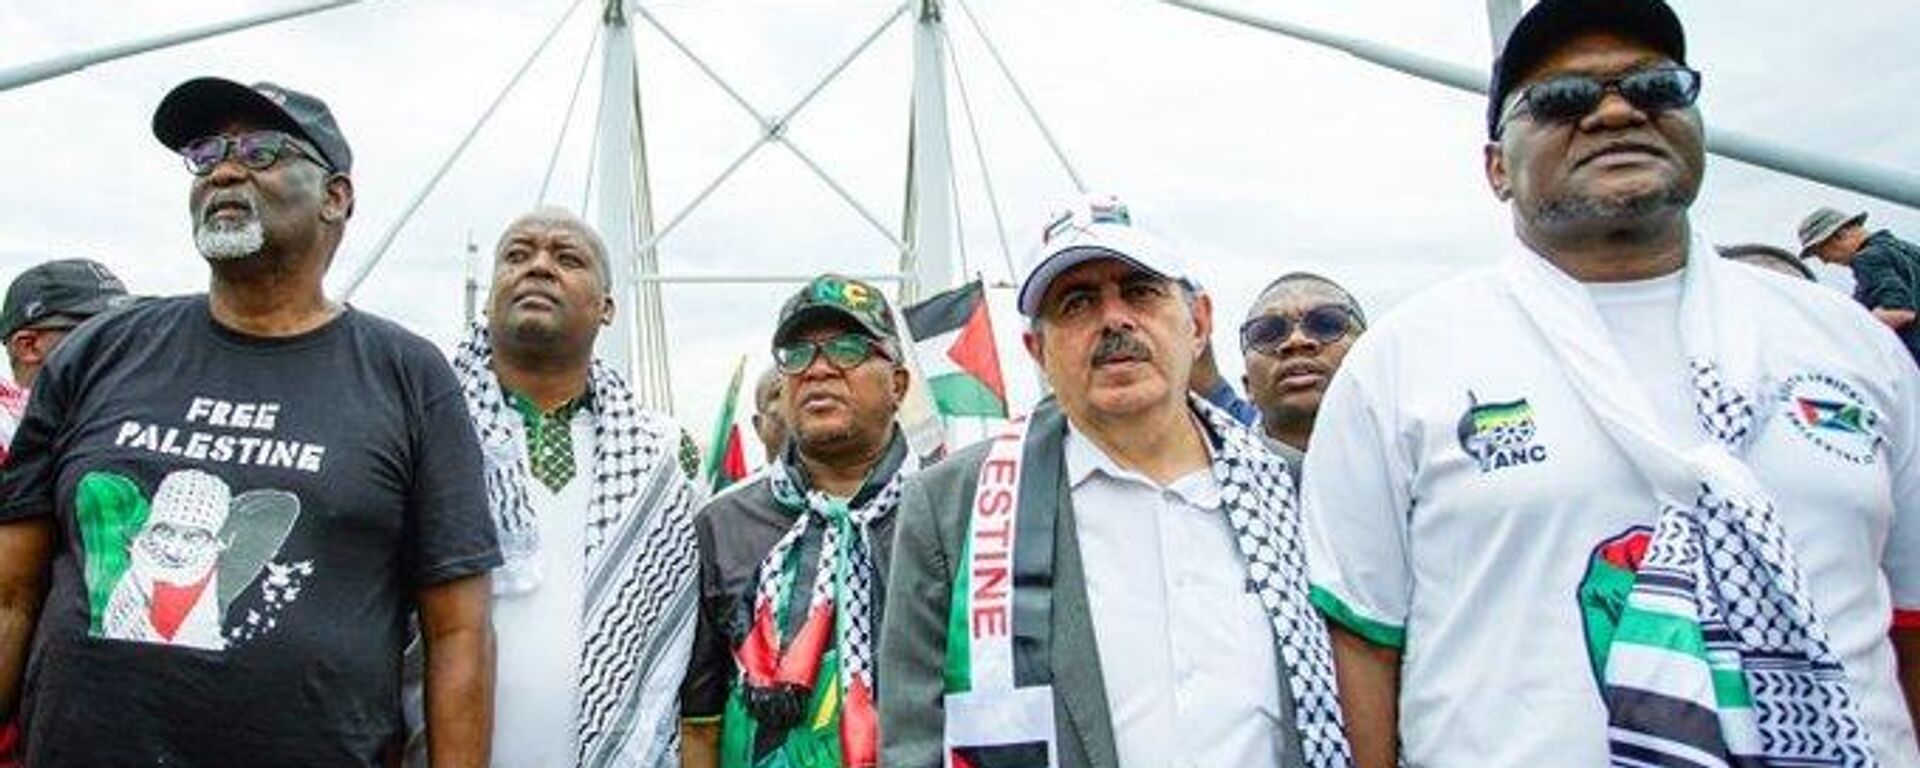 Fikile Mbalula, the secretary-general of the South Africa's ruling party African National Congress, at the Palestine solidarity march in Johannesburg on November, 29. - Sputnik Africa, 1920, 30.11.2023